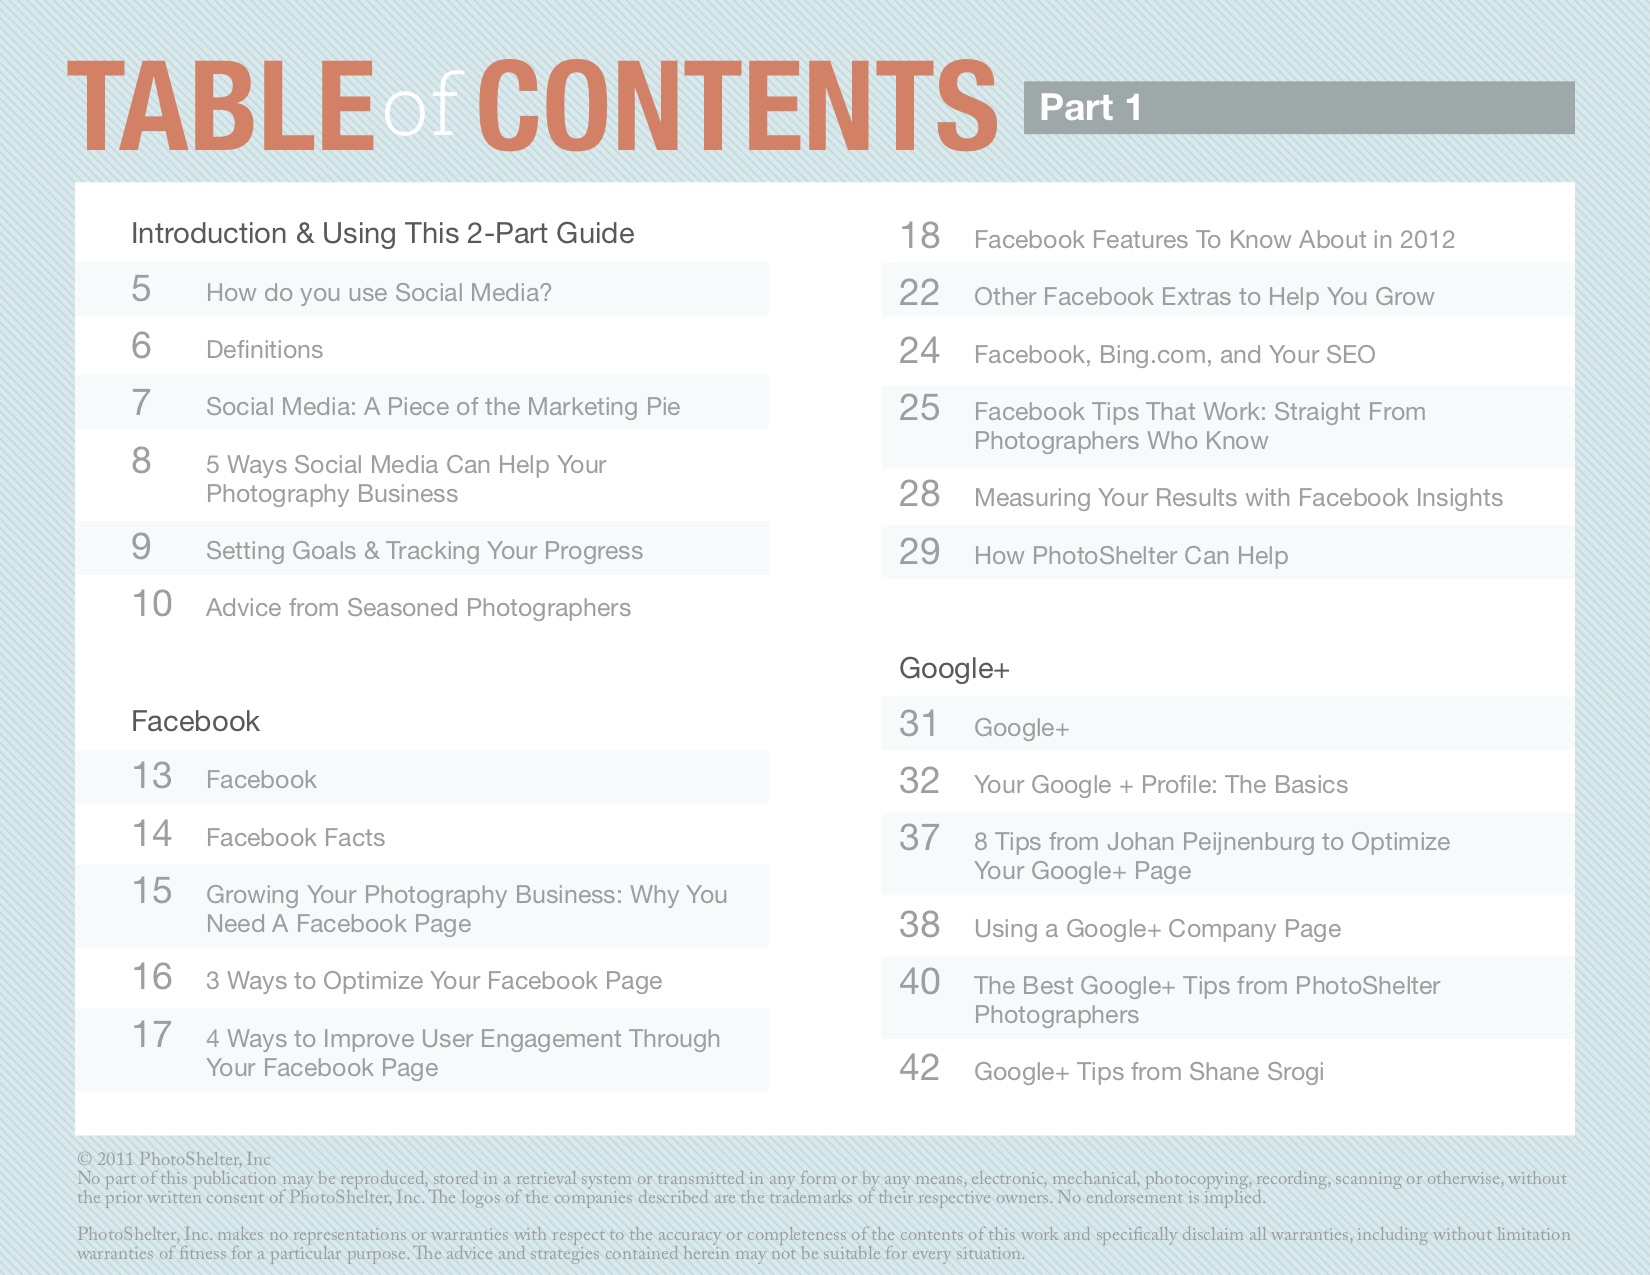 Table of Contents, broken down into sections: Introduction & Using This 2-Part Guide, Facebook and Google+.